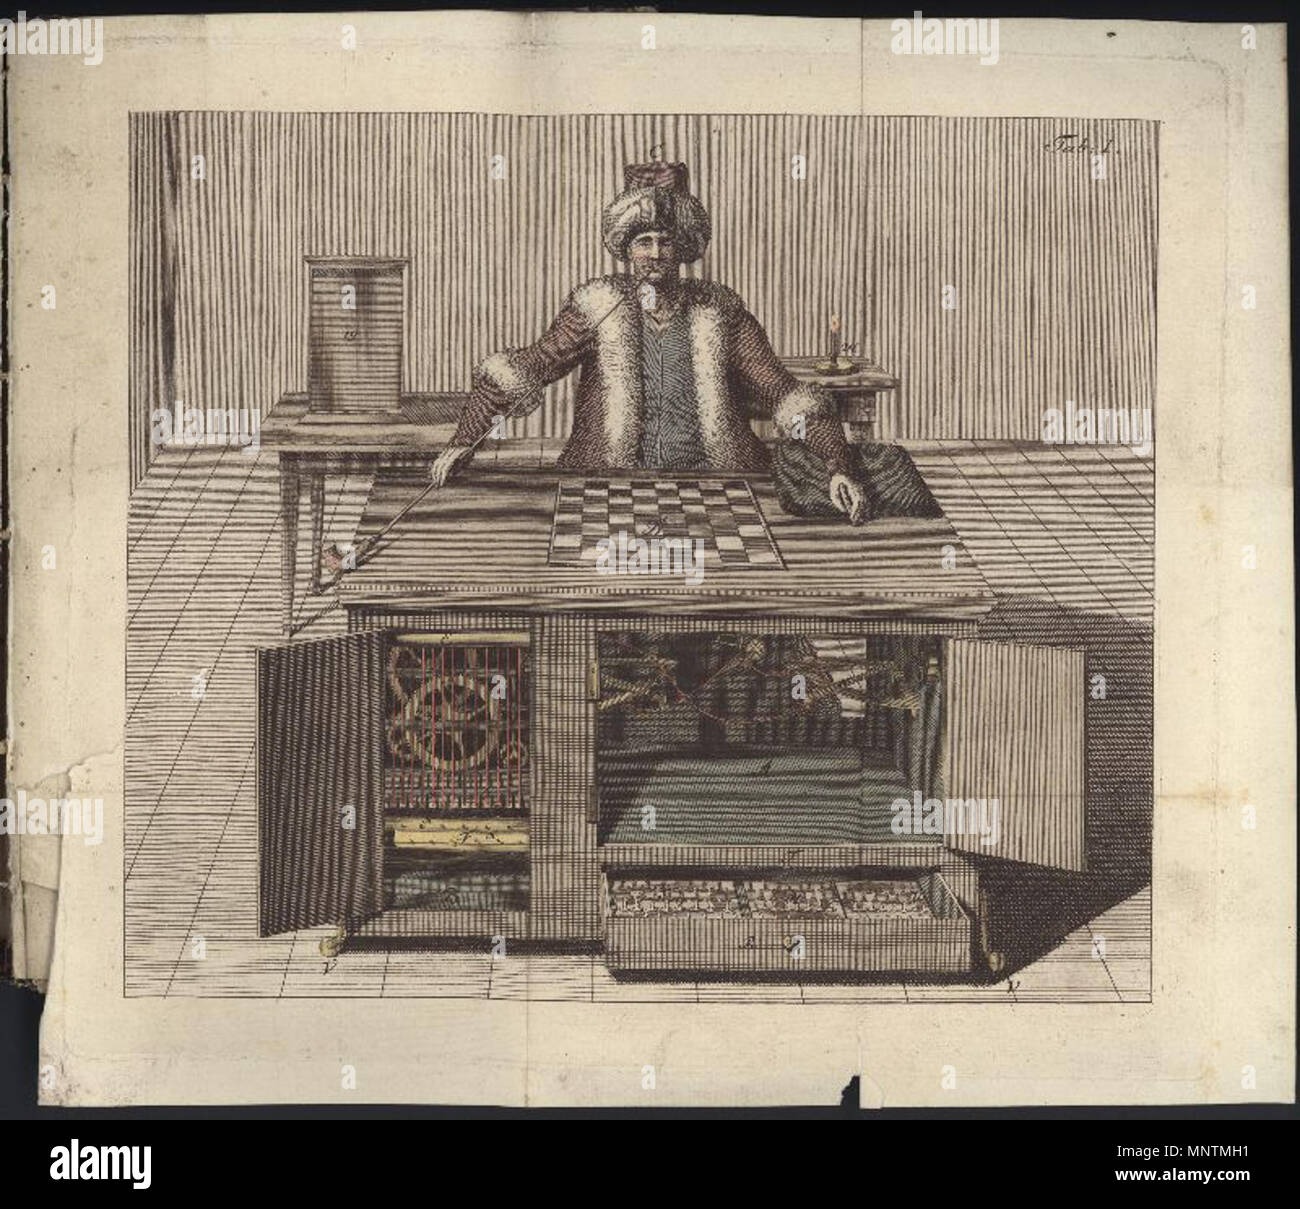 Automaton Chess Player By Wolfgang Von Kempelen Woodcut Published 1893  High-Res Vector Graphic - Getty Images